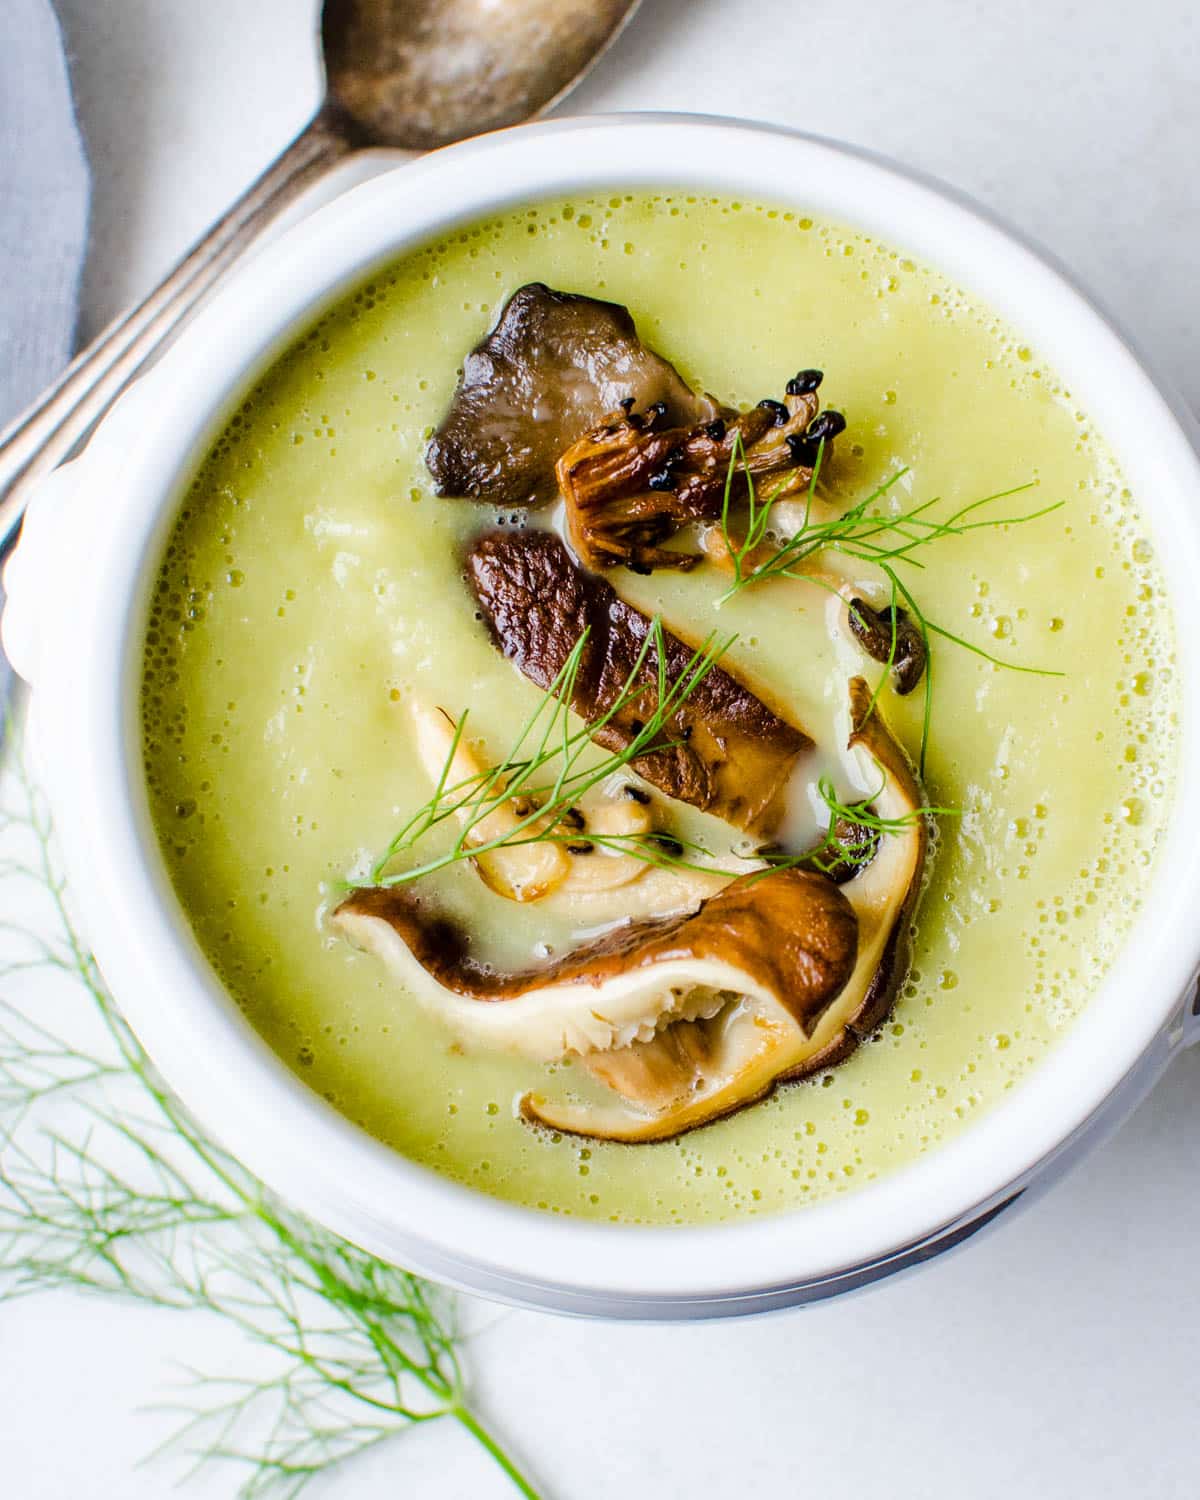 A bowl of fennel leek soup with mushrooms.